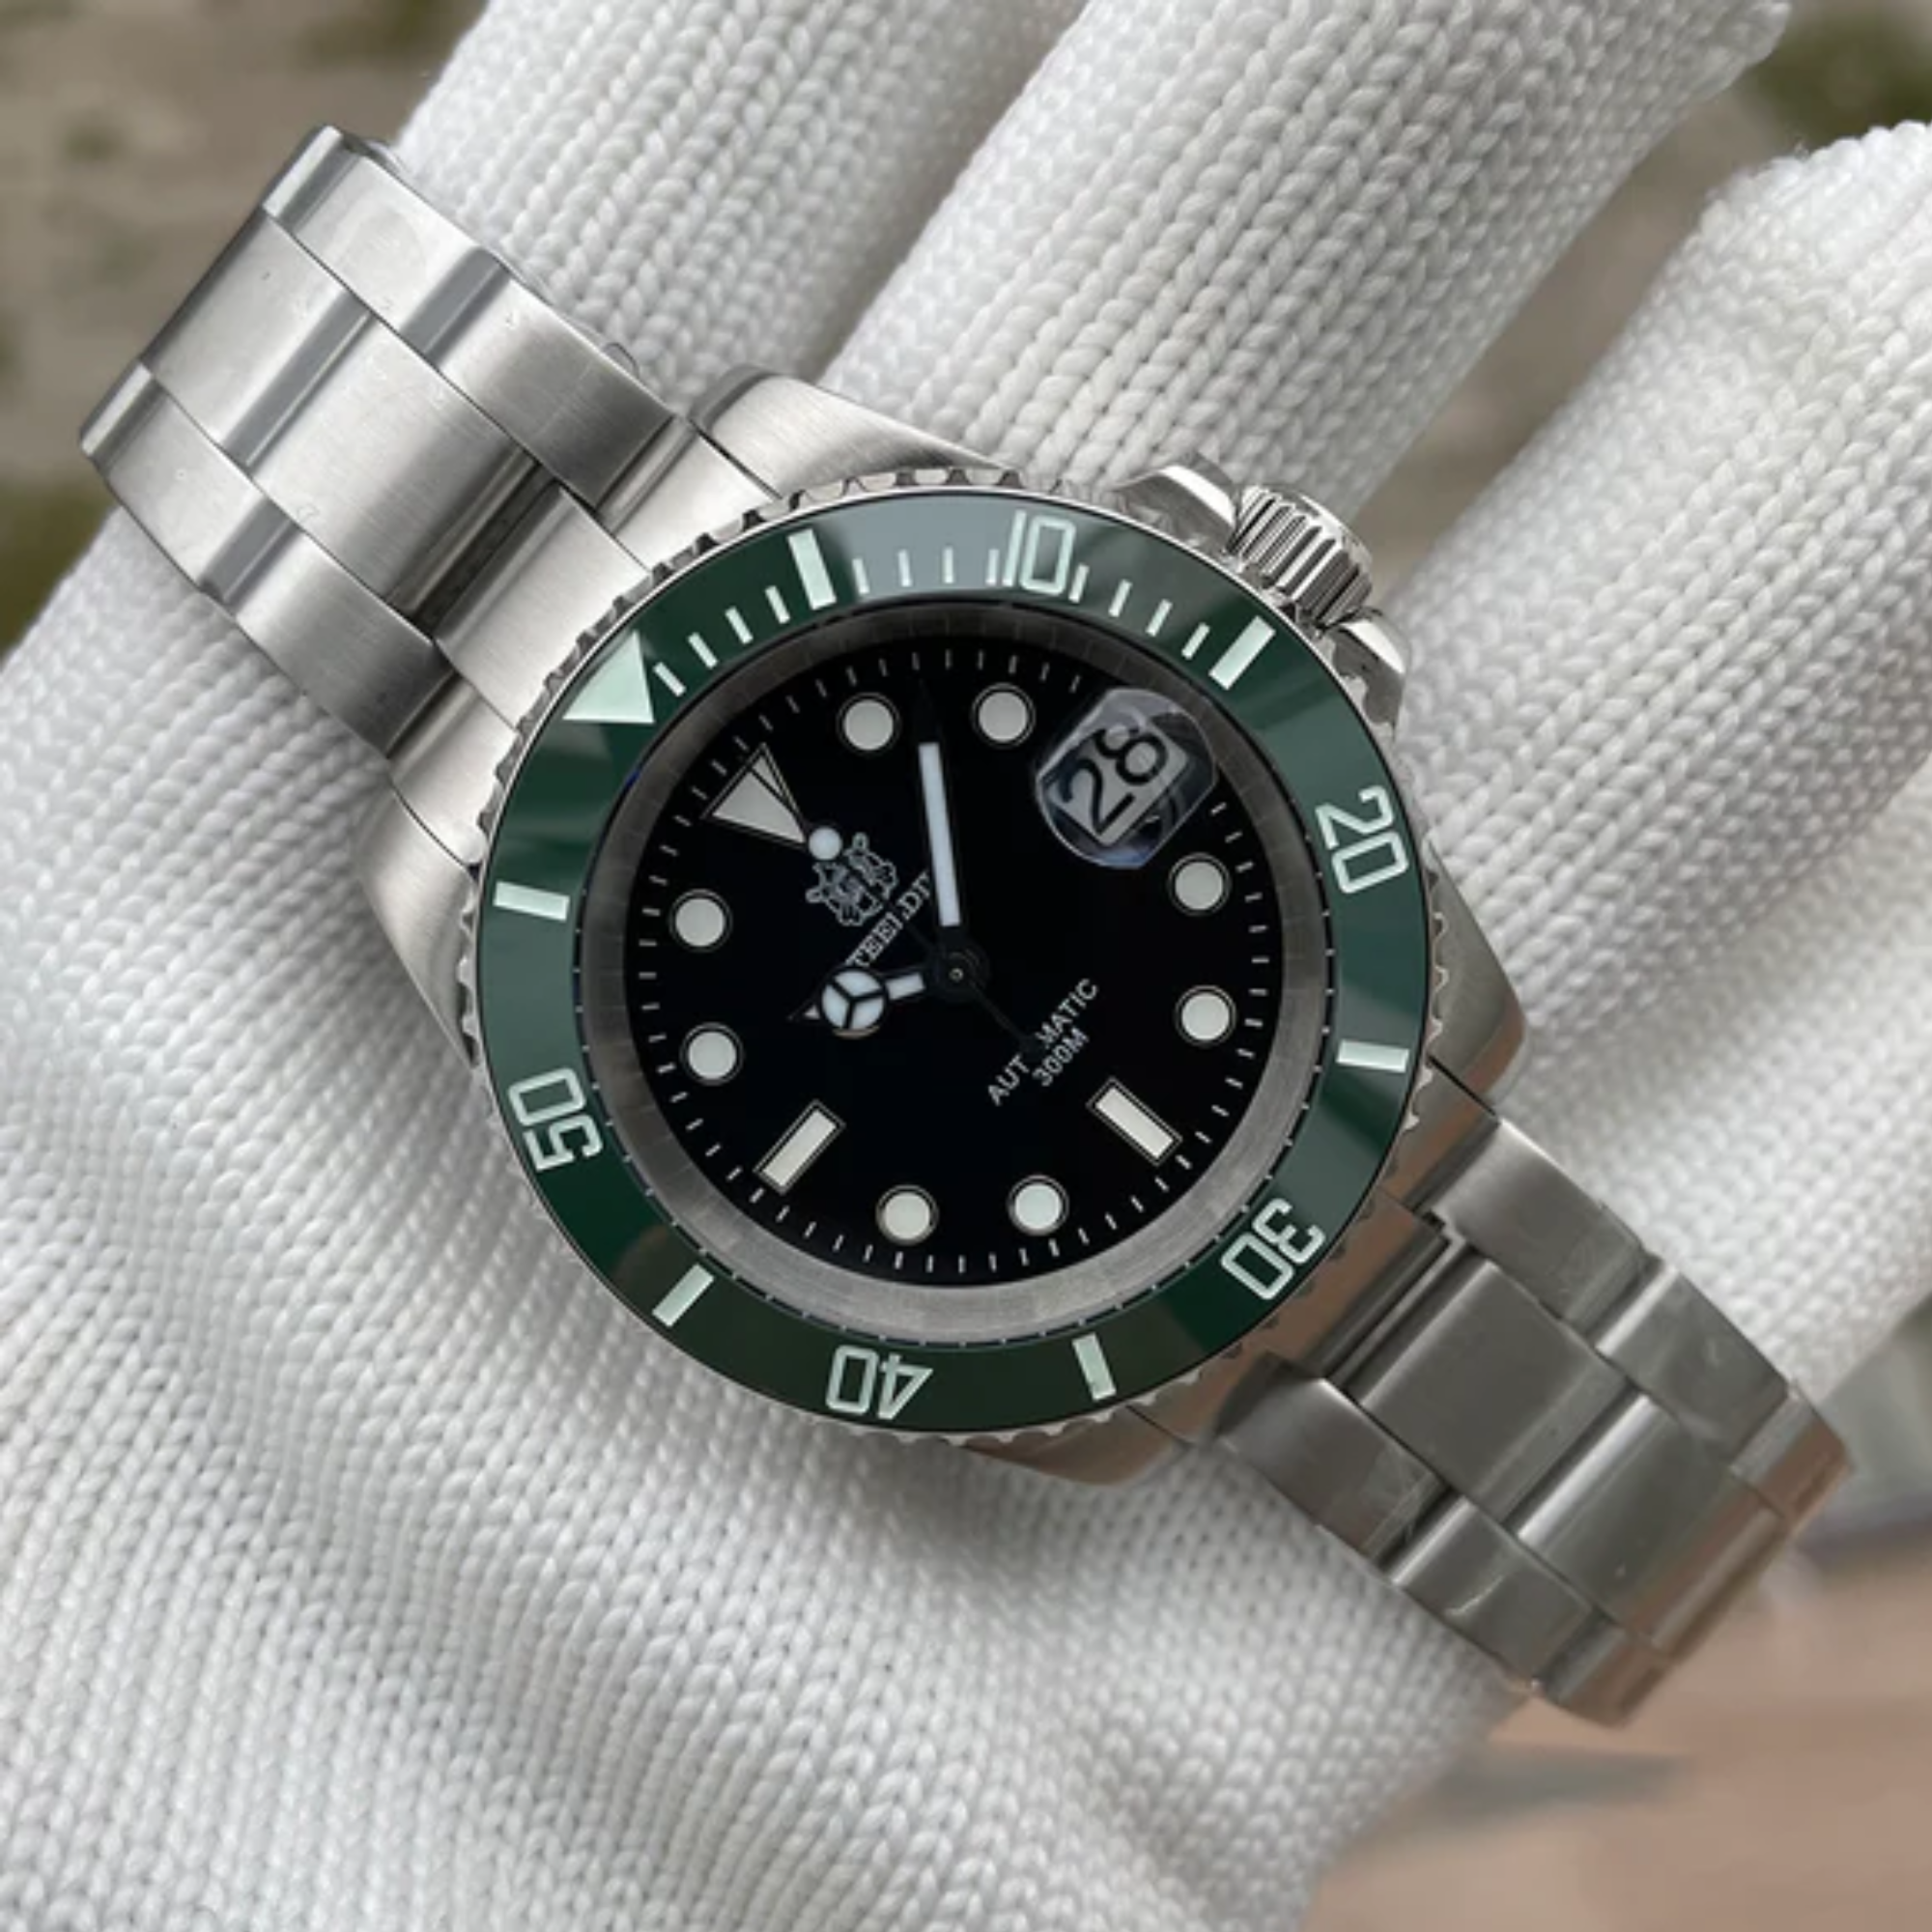 Steeldive SD1953 Sub Men Dive Watch V2 Green/Black Dial With Oyster Bracelet